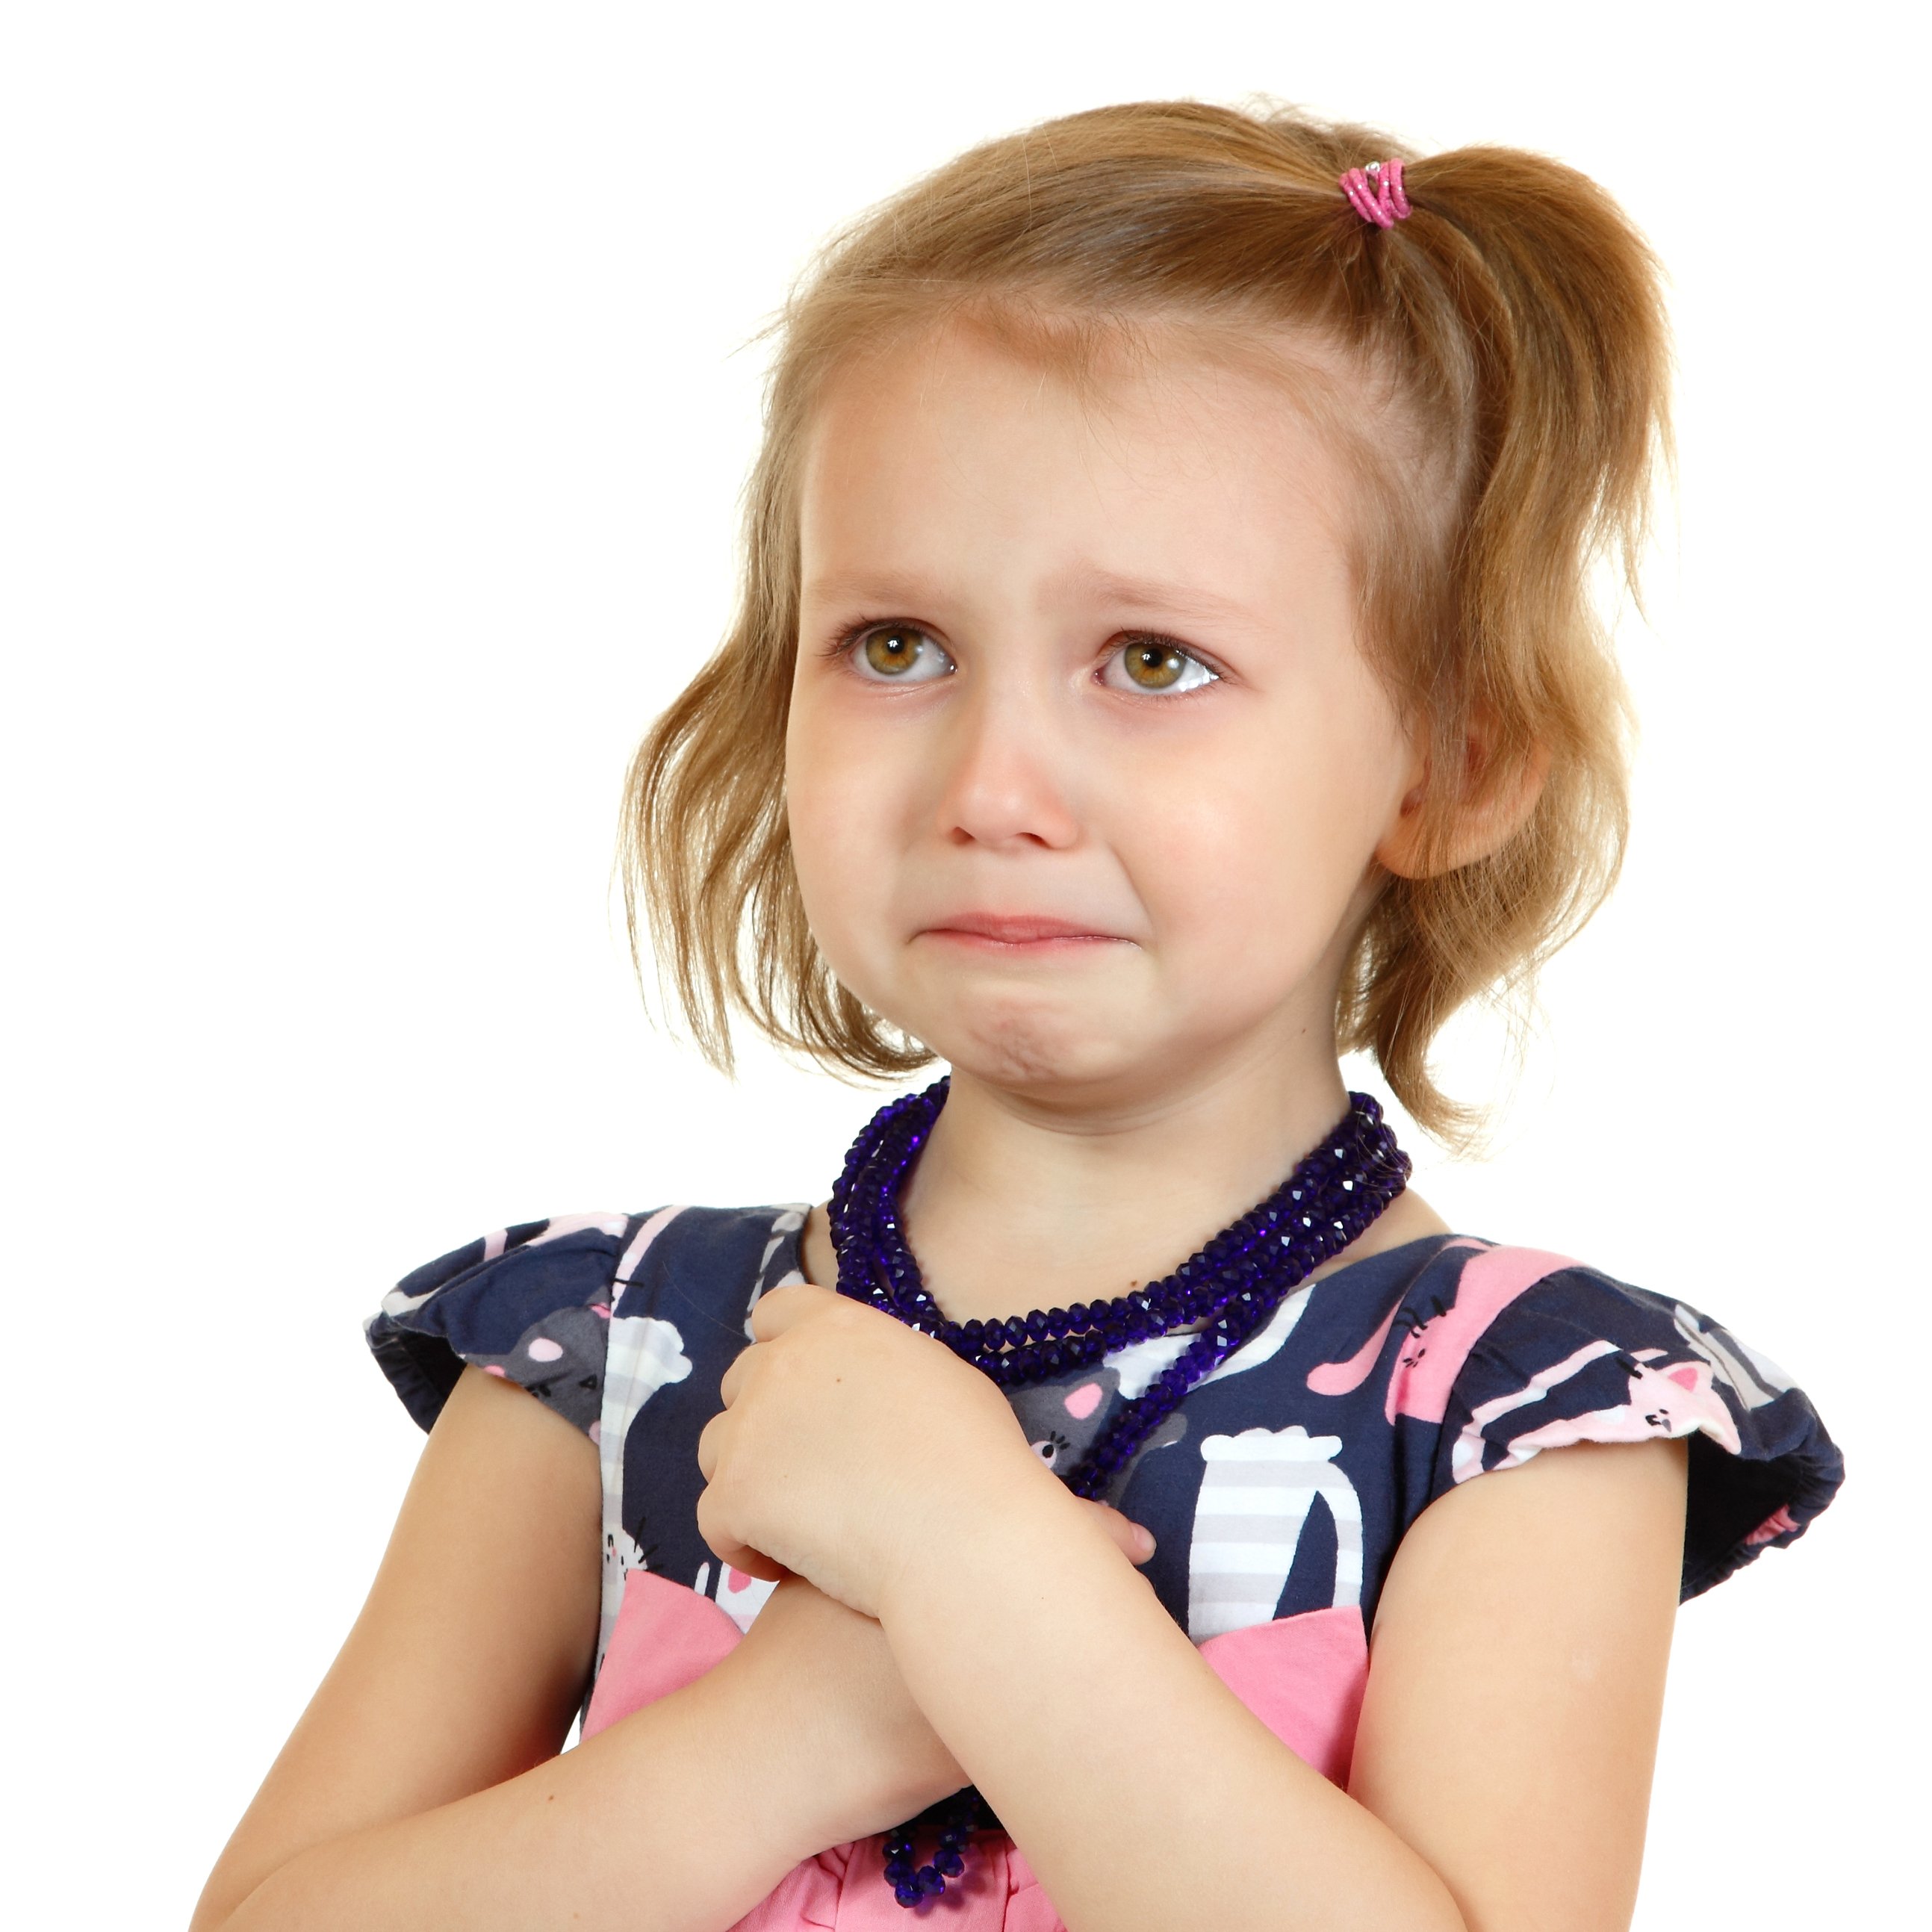 A little girl crying. | Source: Shutterstock 